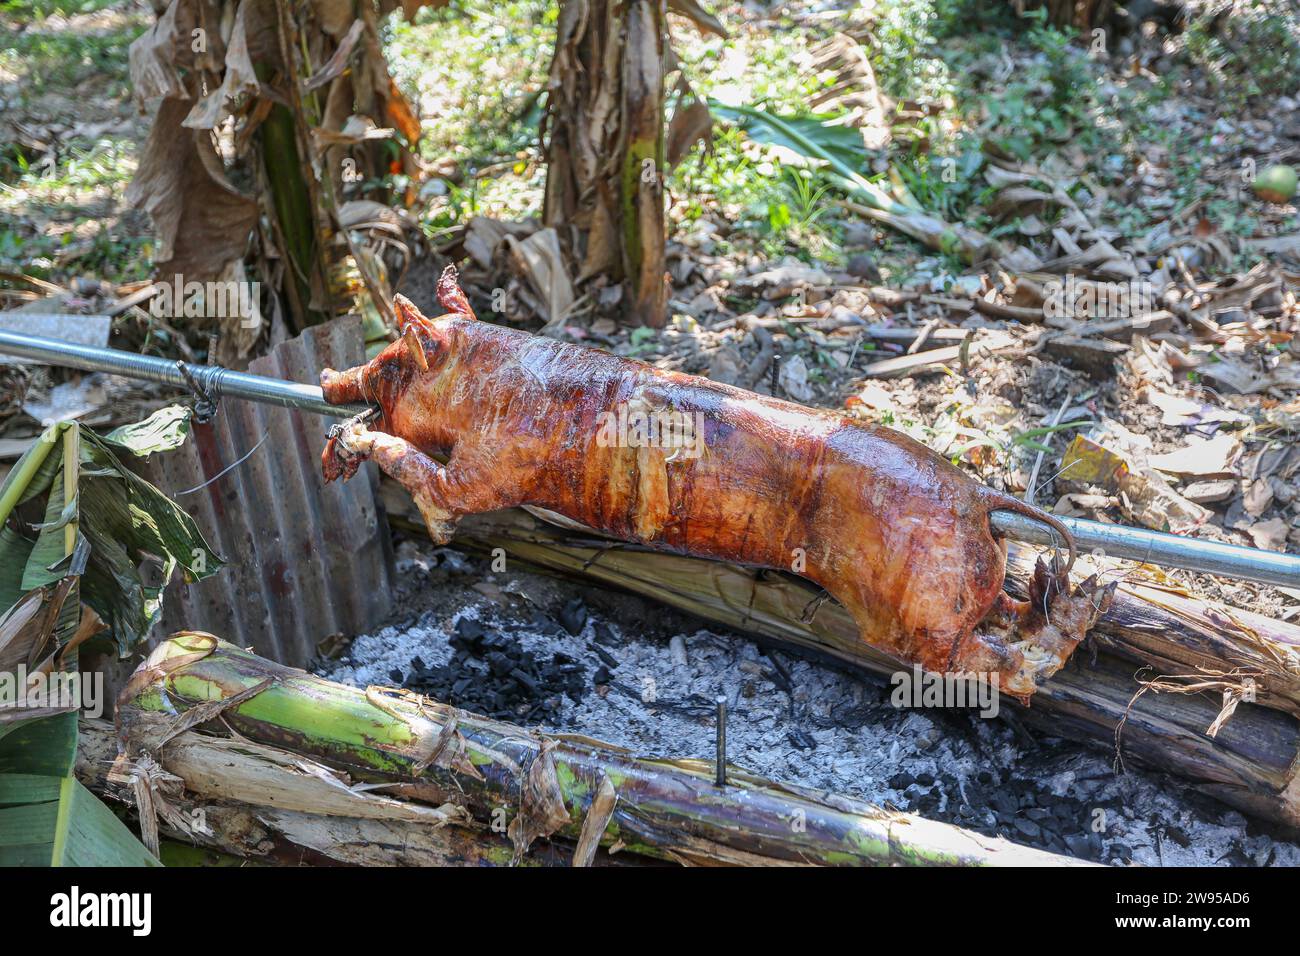 Calamba, Philippines. December 24, 2023 : Filipinos preparing suckling pig in rural style, onions/lemongrass stuffed, roasted over charcoal framed by banana tree trunks in forest. Known as lechon, it's a staple of holidays celebrations in the Christmas-obsessed Philippines. Leftovers will be made into a vinegar stew. Farmer say: 'Lechon has always been a luxury out of reach for many Pinoys (from $100 to $250). Before, we bought it from suppliers. With inflation, we can't afford. We resumed our practice of preparing/cooking it ourselves, old-fashioned way'. Credit: Kevin Izorce/Alamy Live News Stock Photo